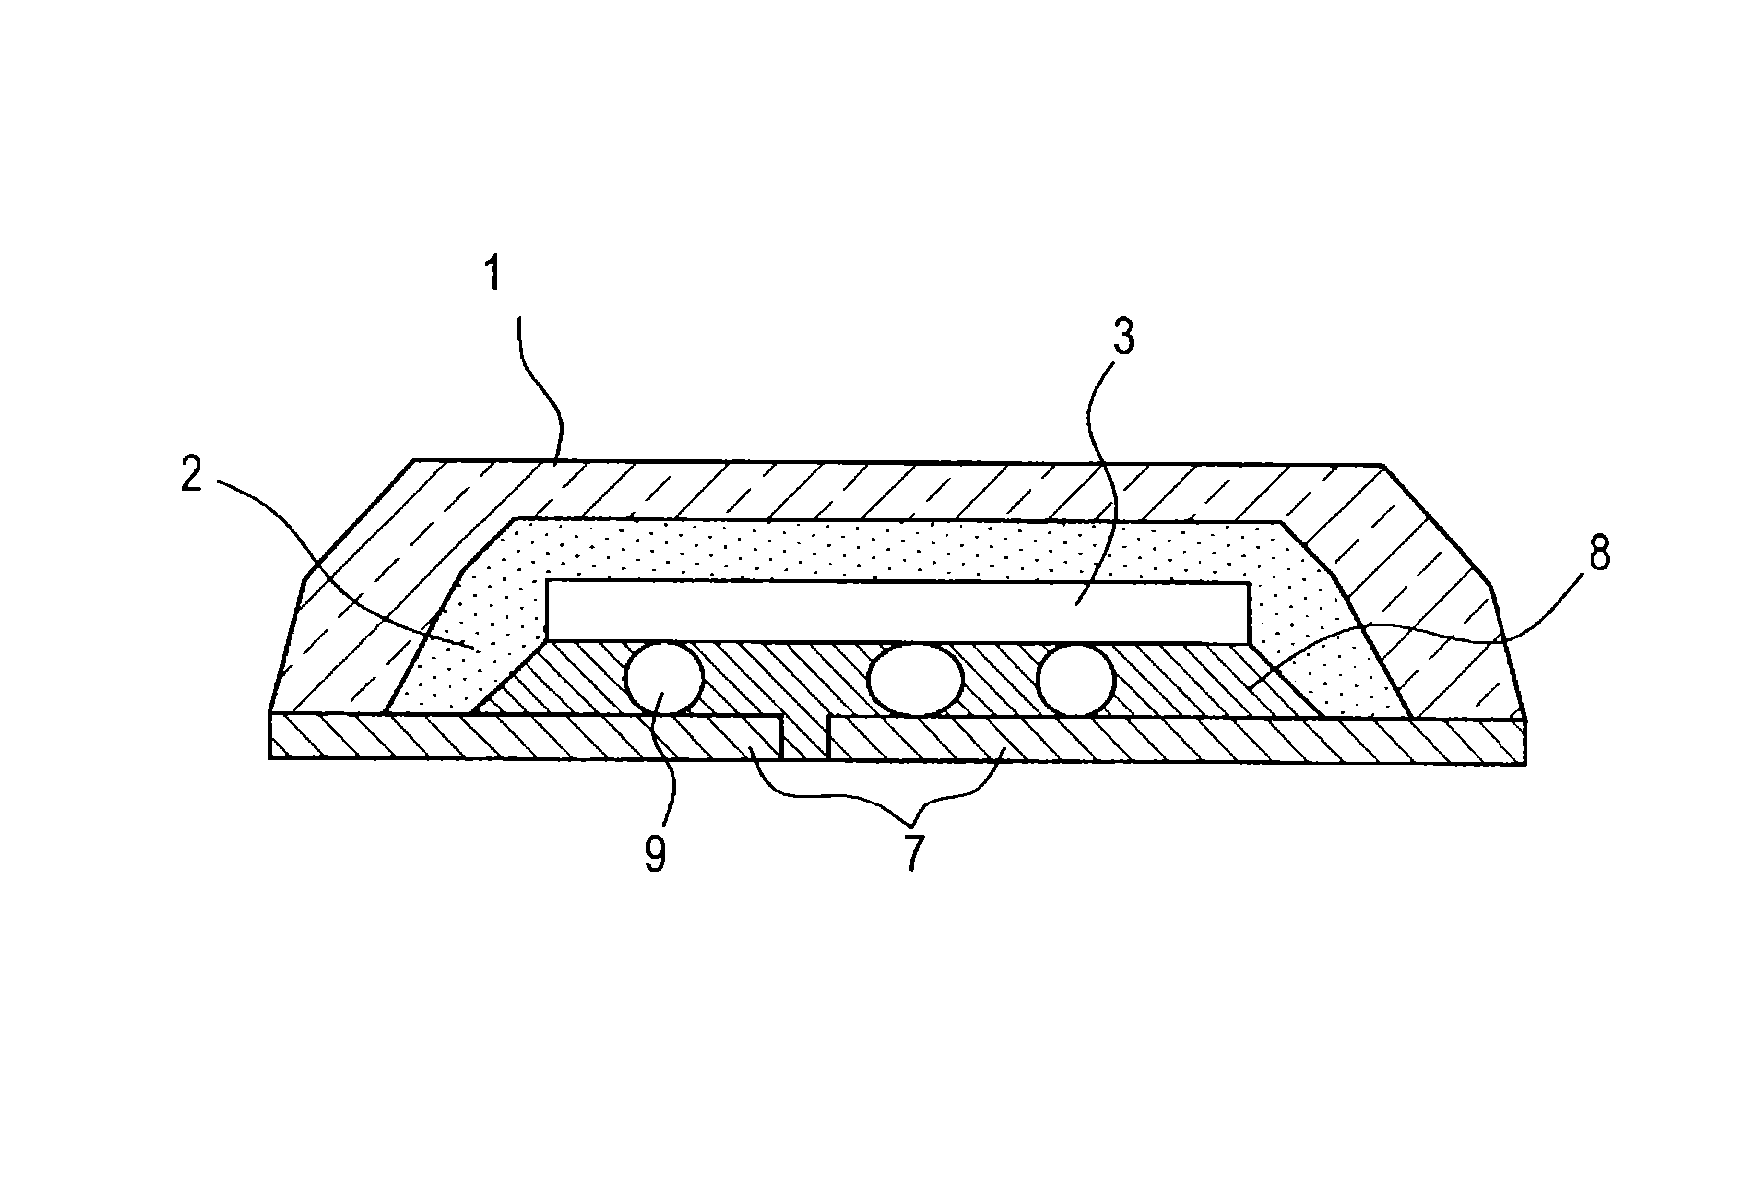 Heat-curable silicone resin sheet having phosphor-containing layer and phosphor-free layer, method of producing light emitting device utilizing same and light emitting semiconductor device obtained by the method